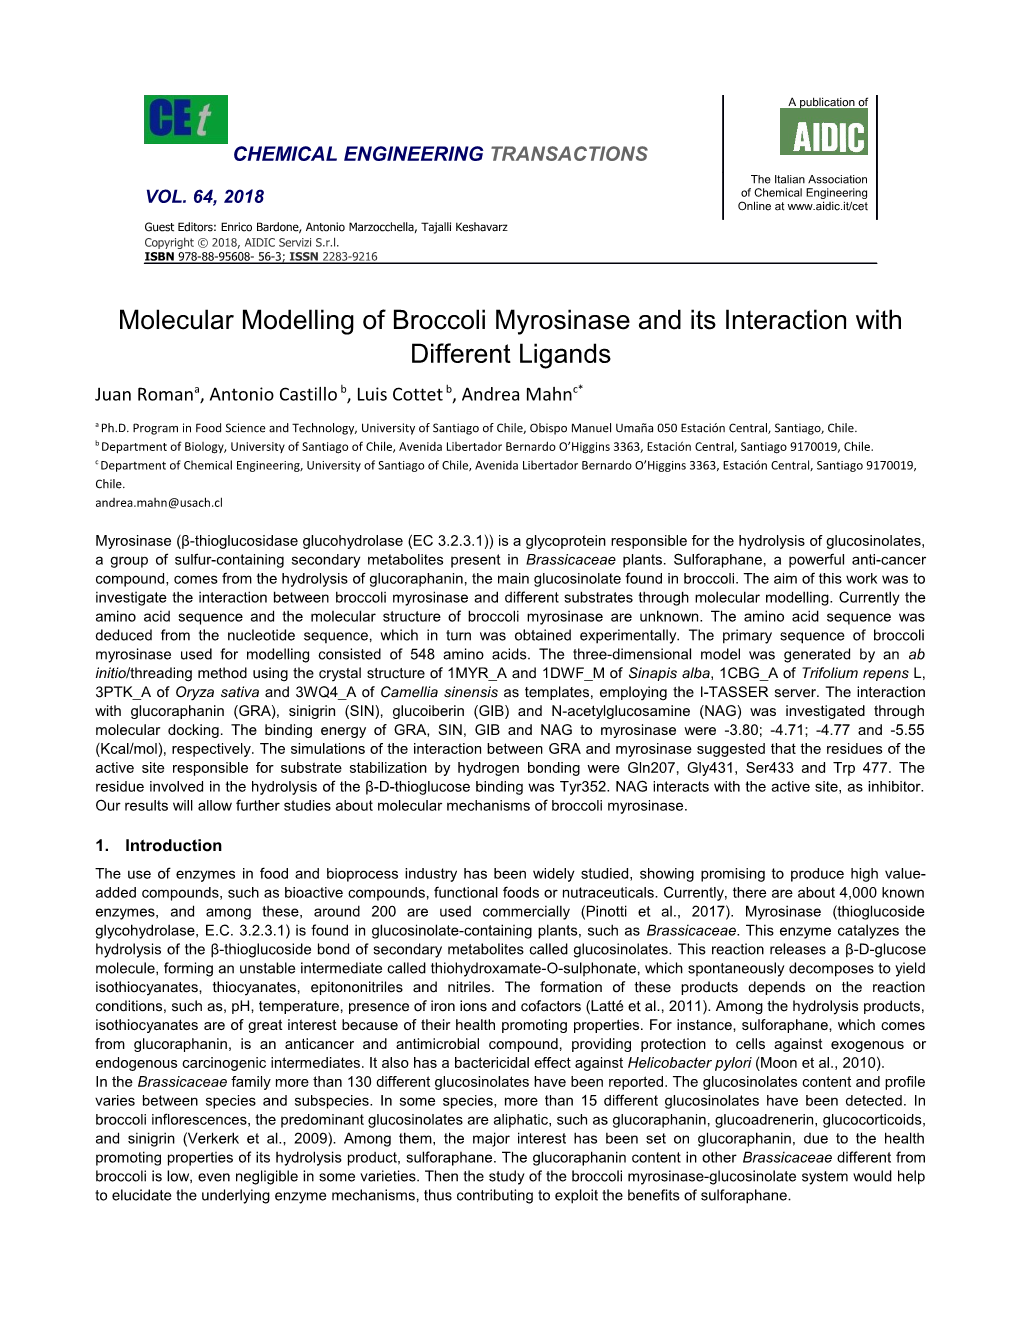 Molecular Modelling of Broccoli Myrosinase and Its Interaction with Different Ligands